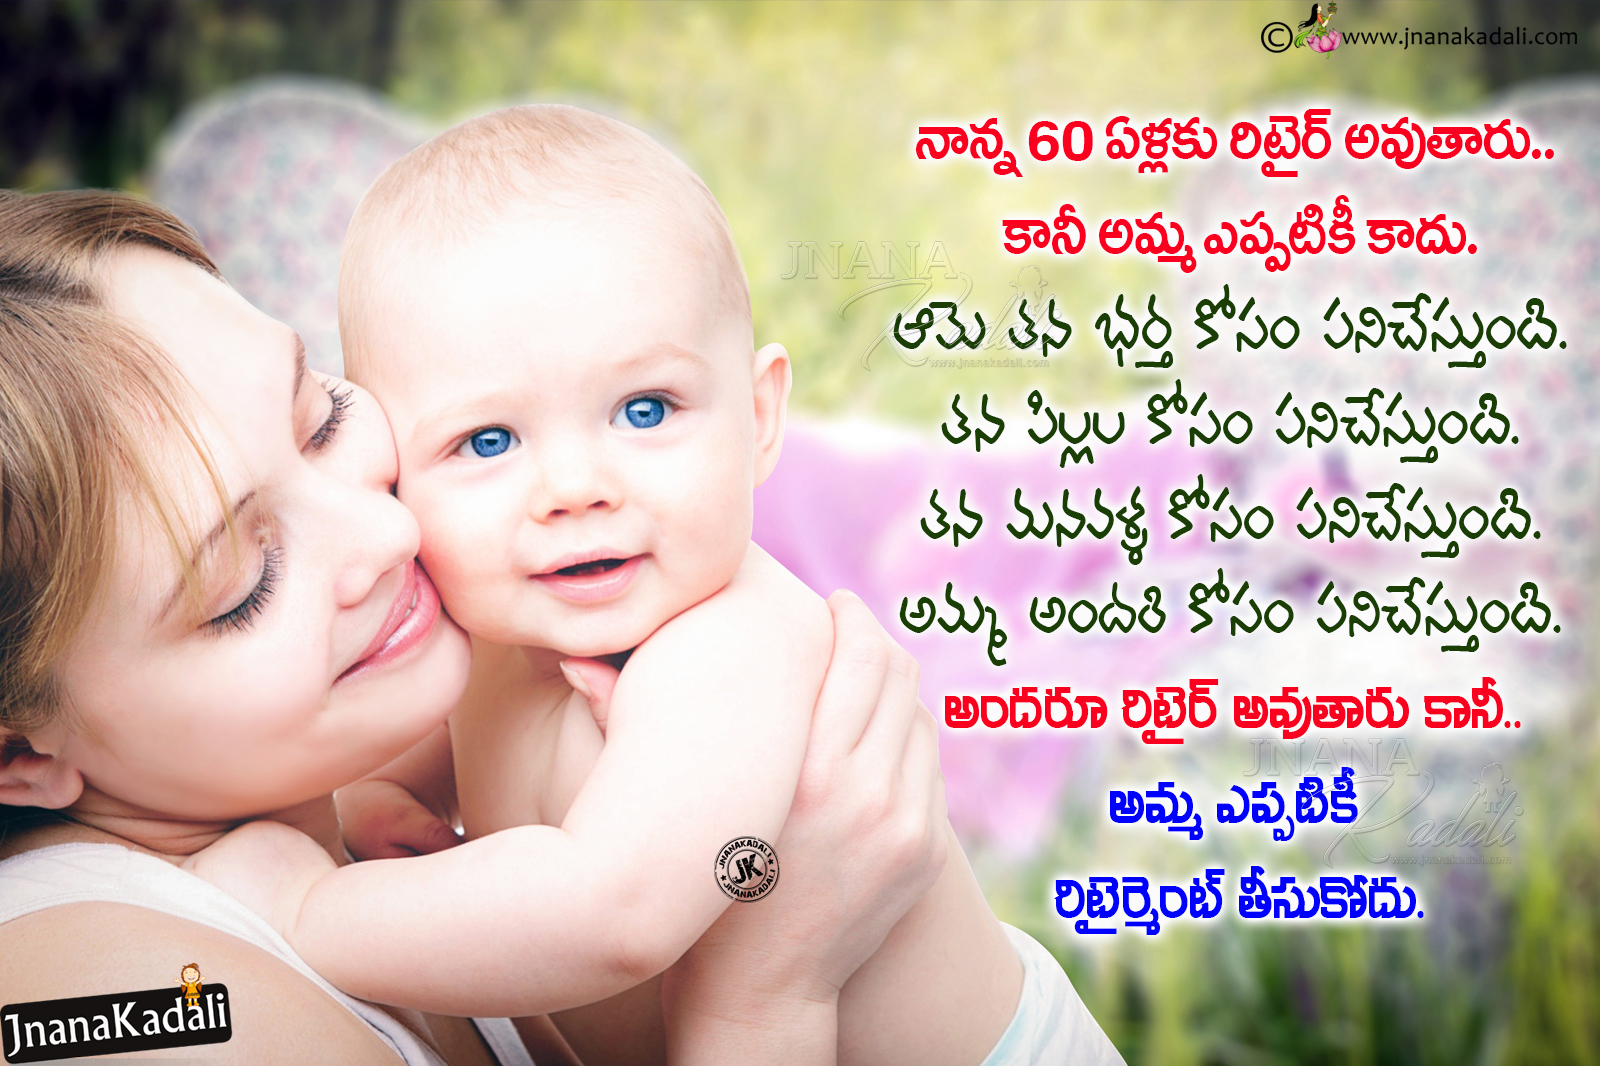 I Love You Amma Telugu Mother Quotes With Hd Wallpapers Jnana Kadali Com Telugu Quotes English Quotes Hindi Quotes Tamil Quotes Dharmasandehalu